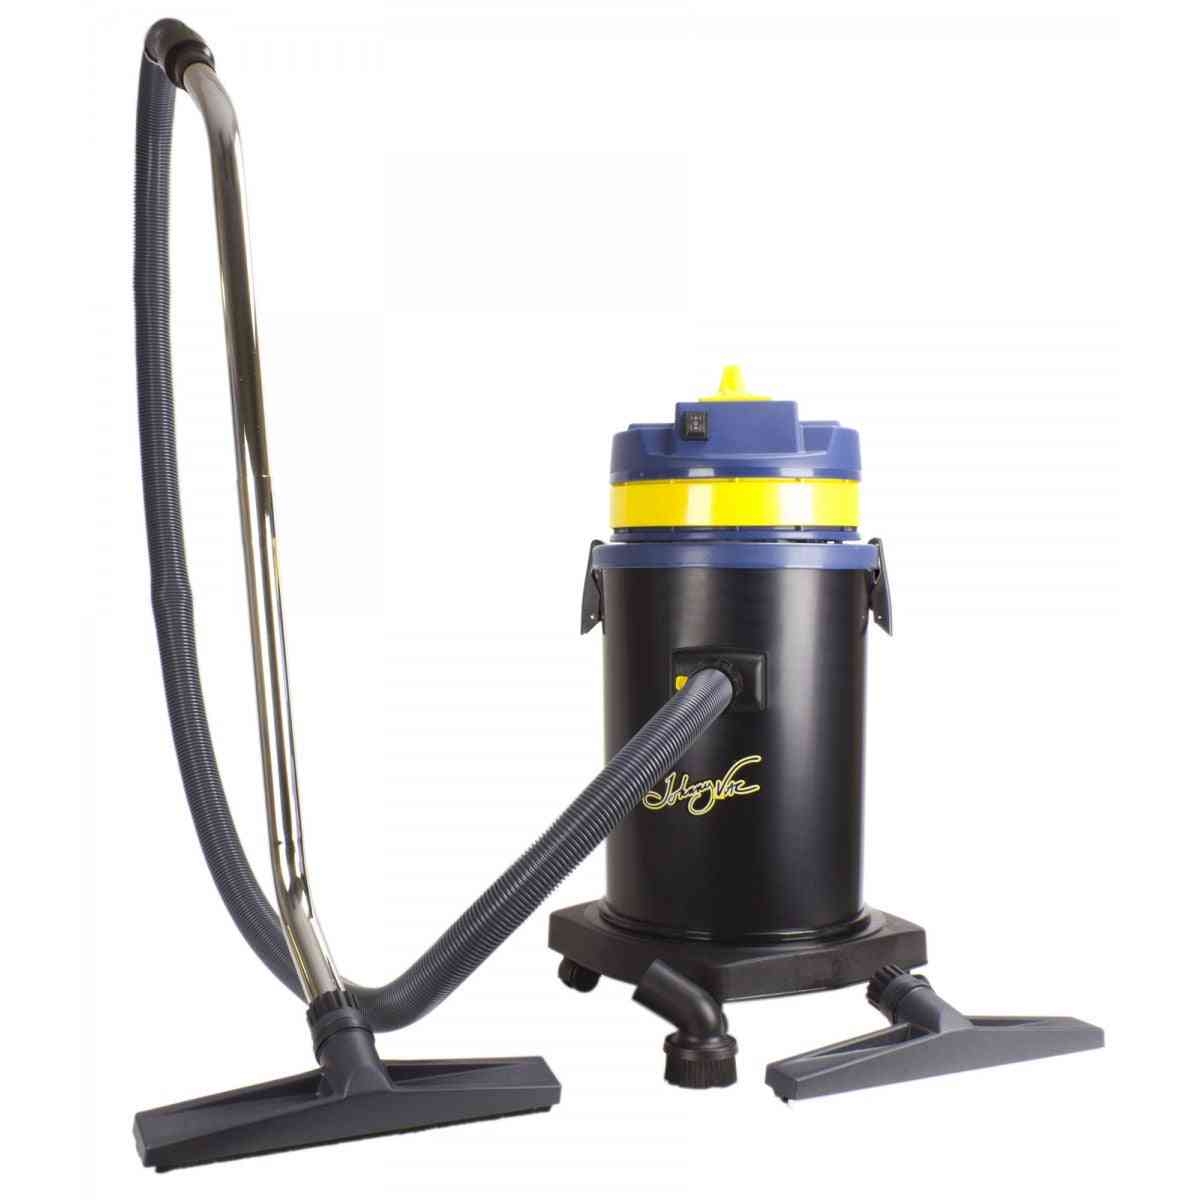 Johnny Vac Commercial Canister Vacuum 8 Gallon Capacity The Vacuum